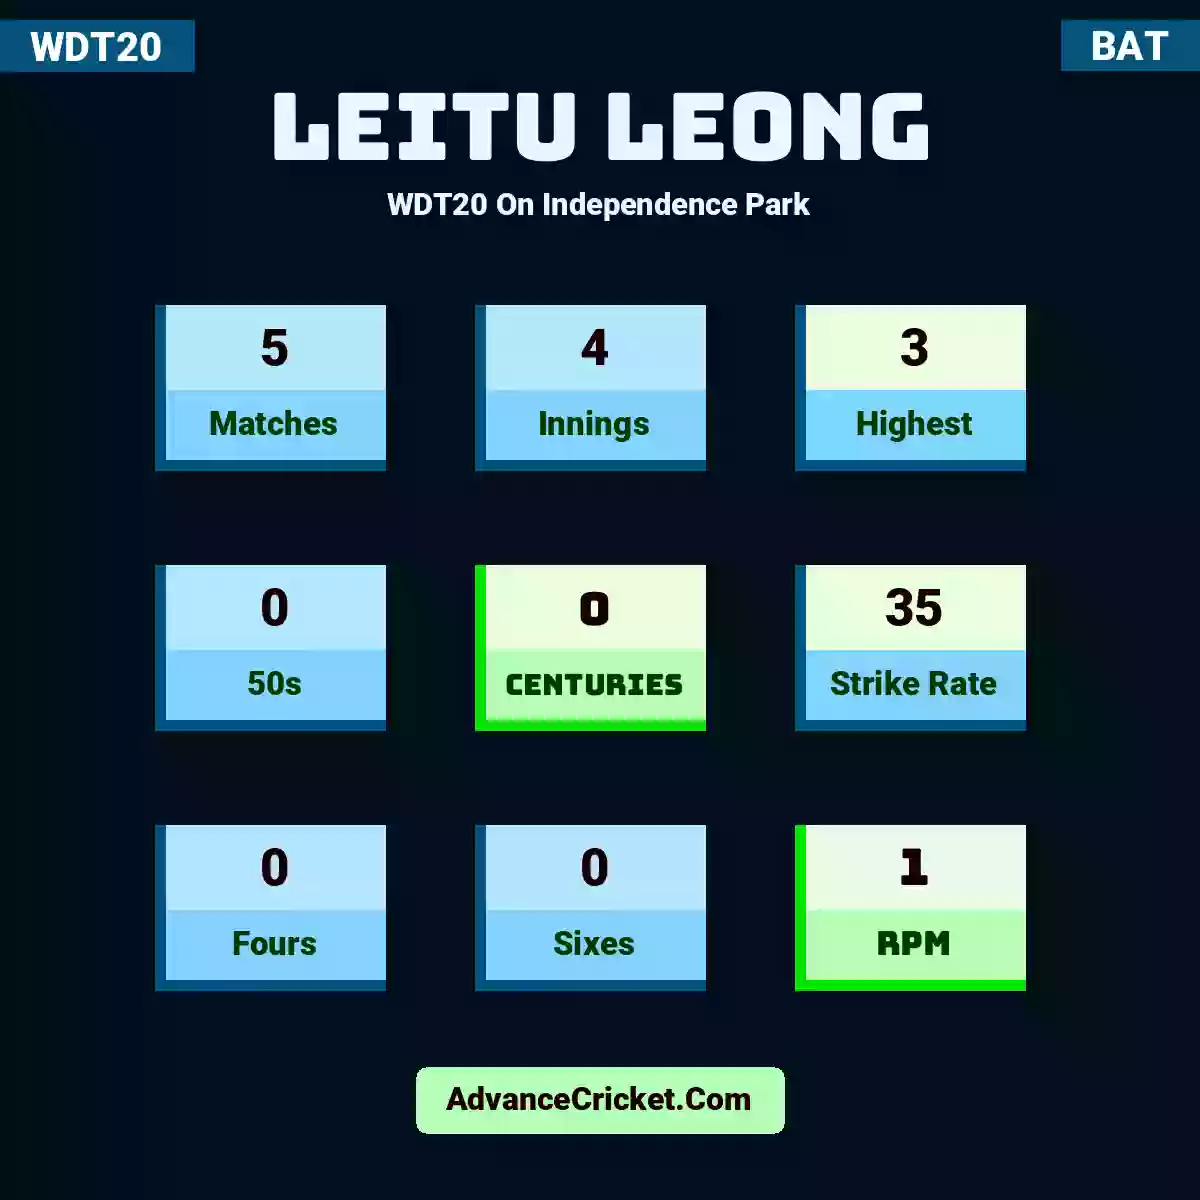 Leitu Leong WDT20  On Independence Park, Leitu Leong played 5 matches, scored 3 runs as highest, 0 half-centuries, and 0 centuries, with a strike rate of 35. L.Leong hit 0 fours and 0 sixes, with an RPM of 1.